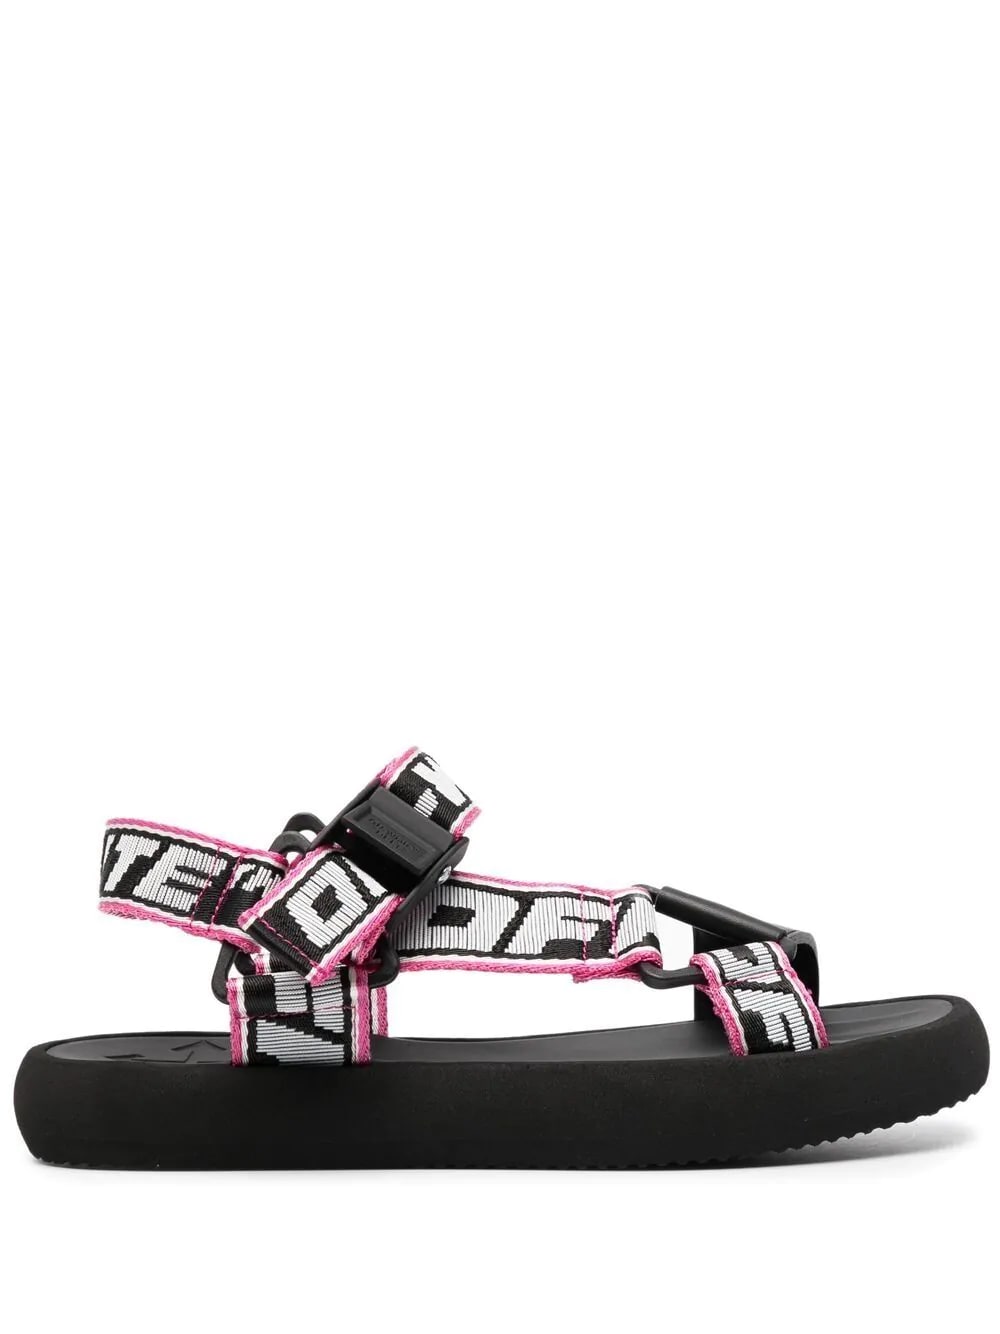 Off-White Woman Rubber Sandal With Black And Pink Logoed Nylon Tapes